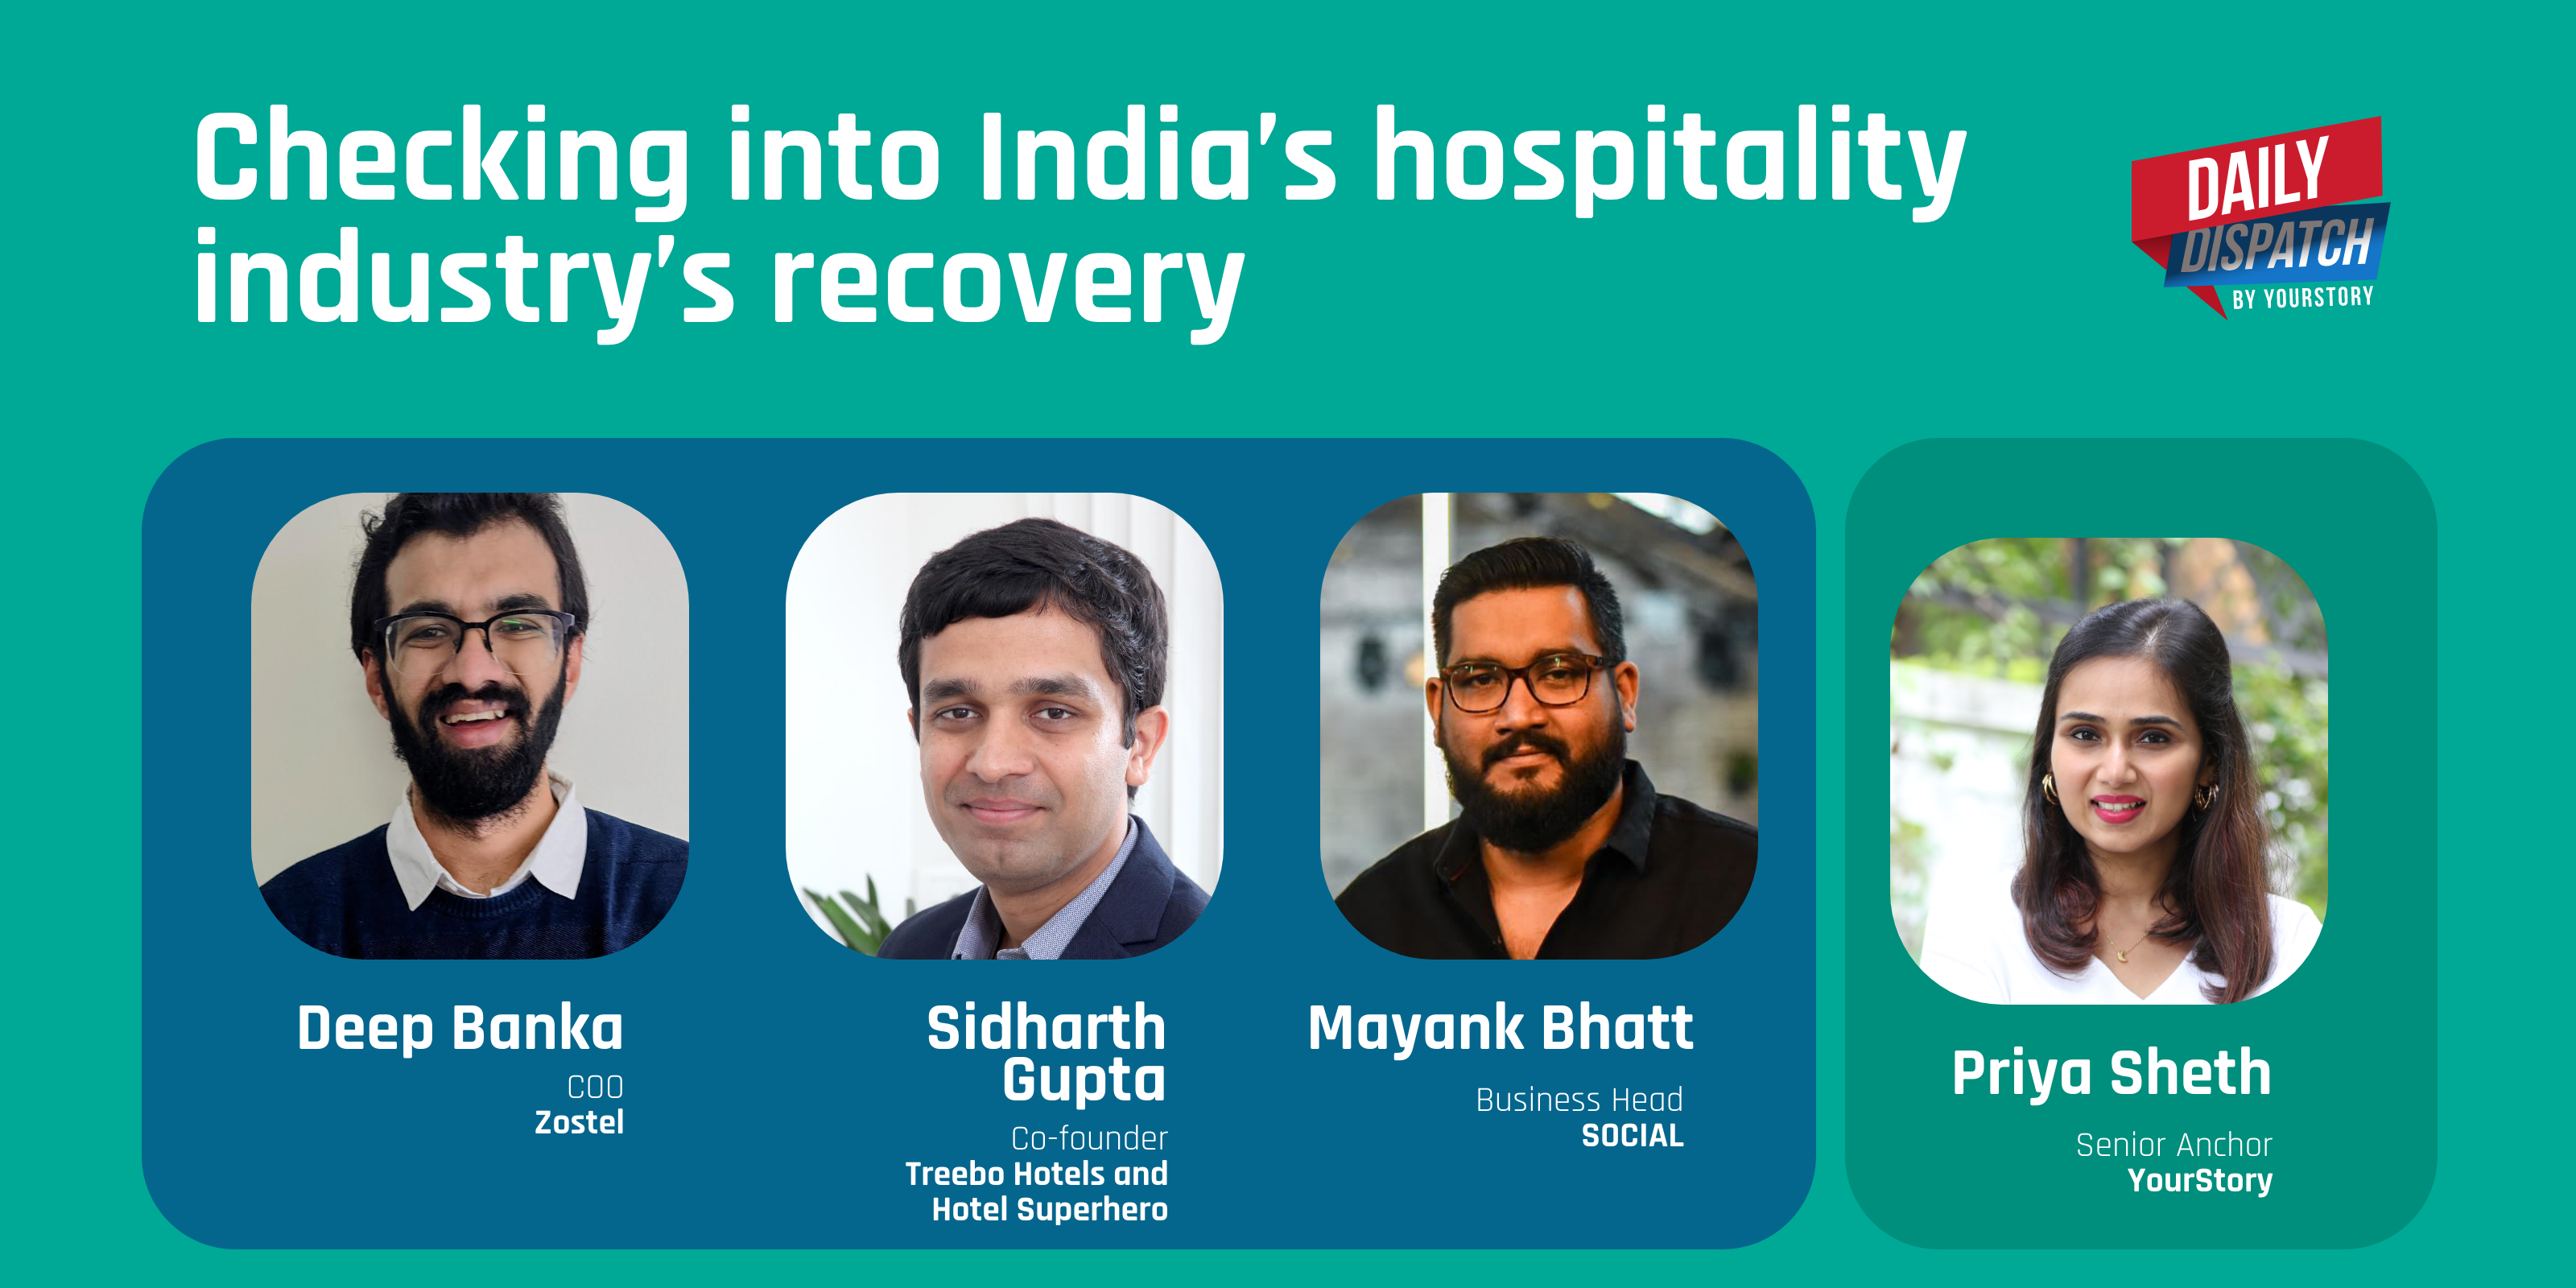 From lockdown to 10x growth: India’s hospitality industry spearheads into recovery
